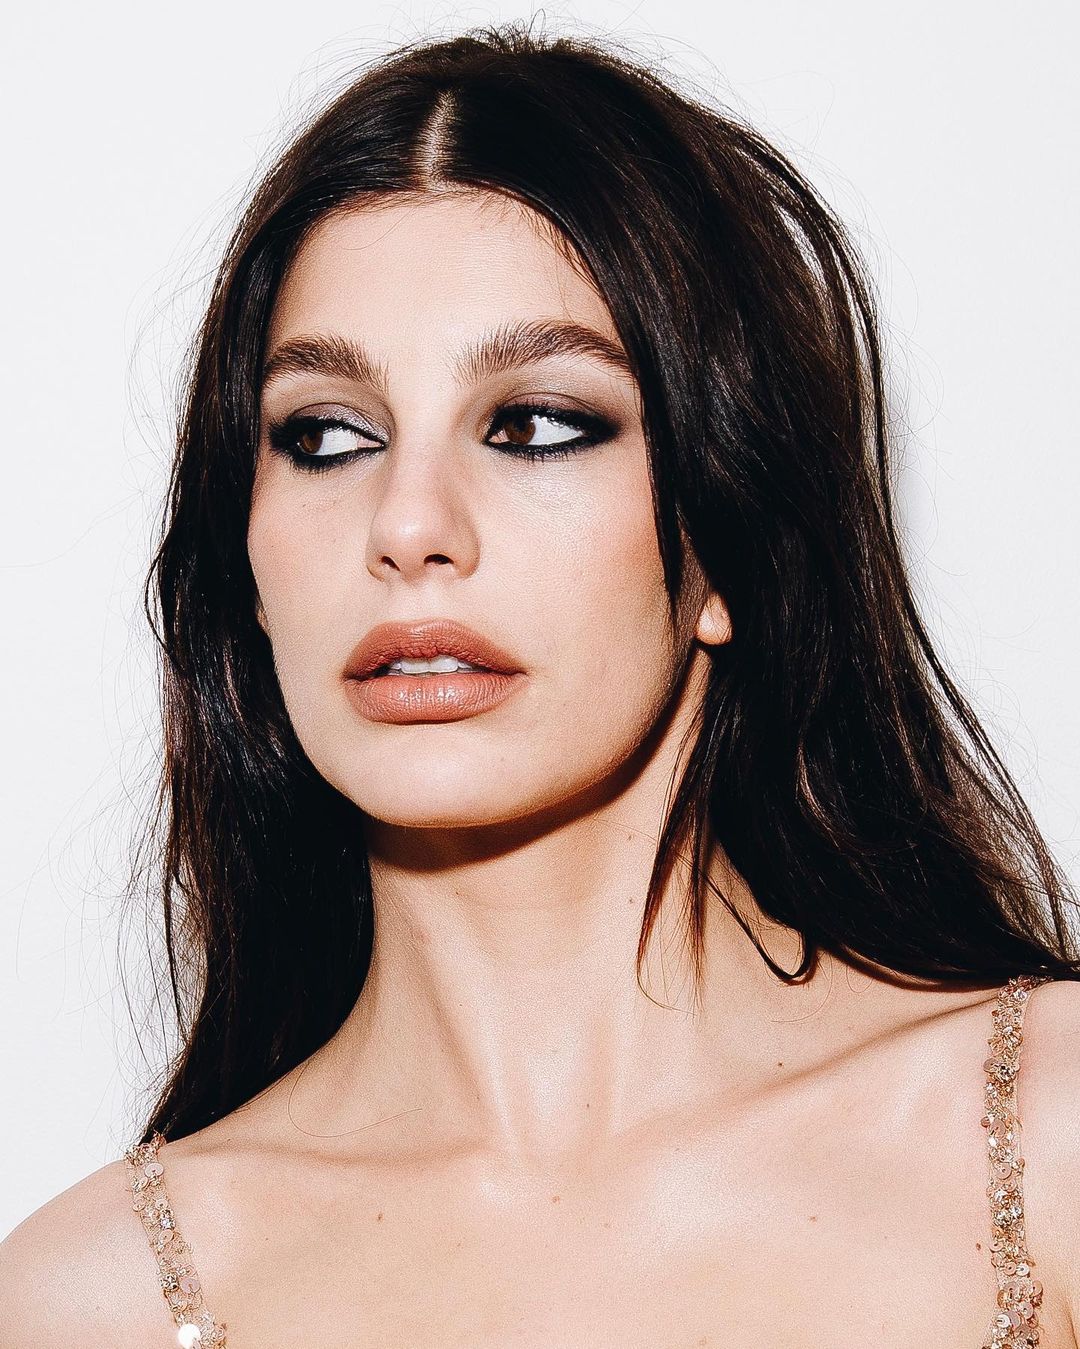 Makeup on Camila Morrone by Ash Holm